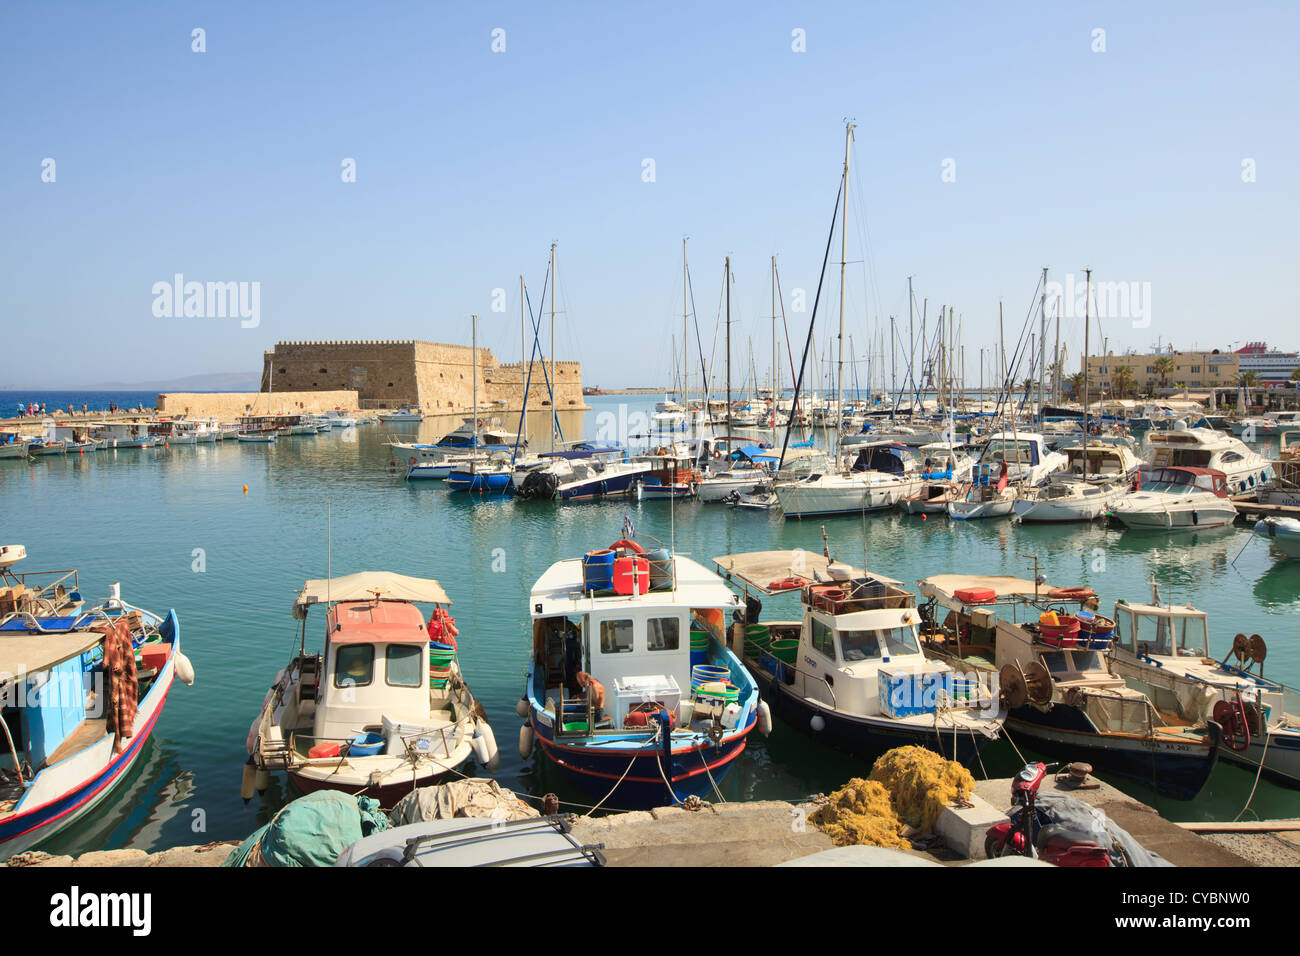 Venetian Fortress and fishing boats at Heraklion Harbour on the Greek island of Crete, Greece. Stock Photo